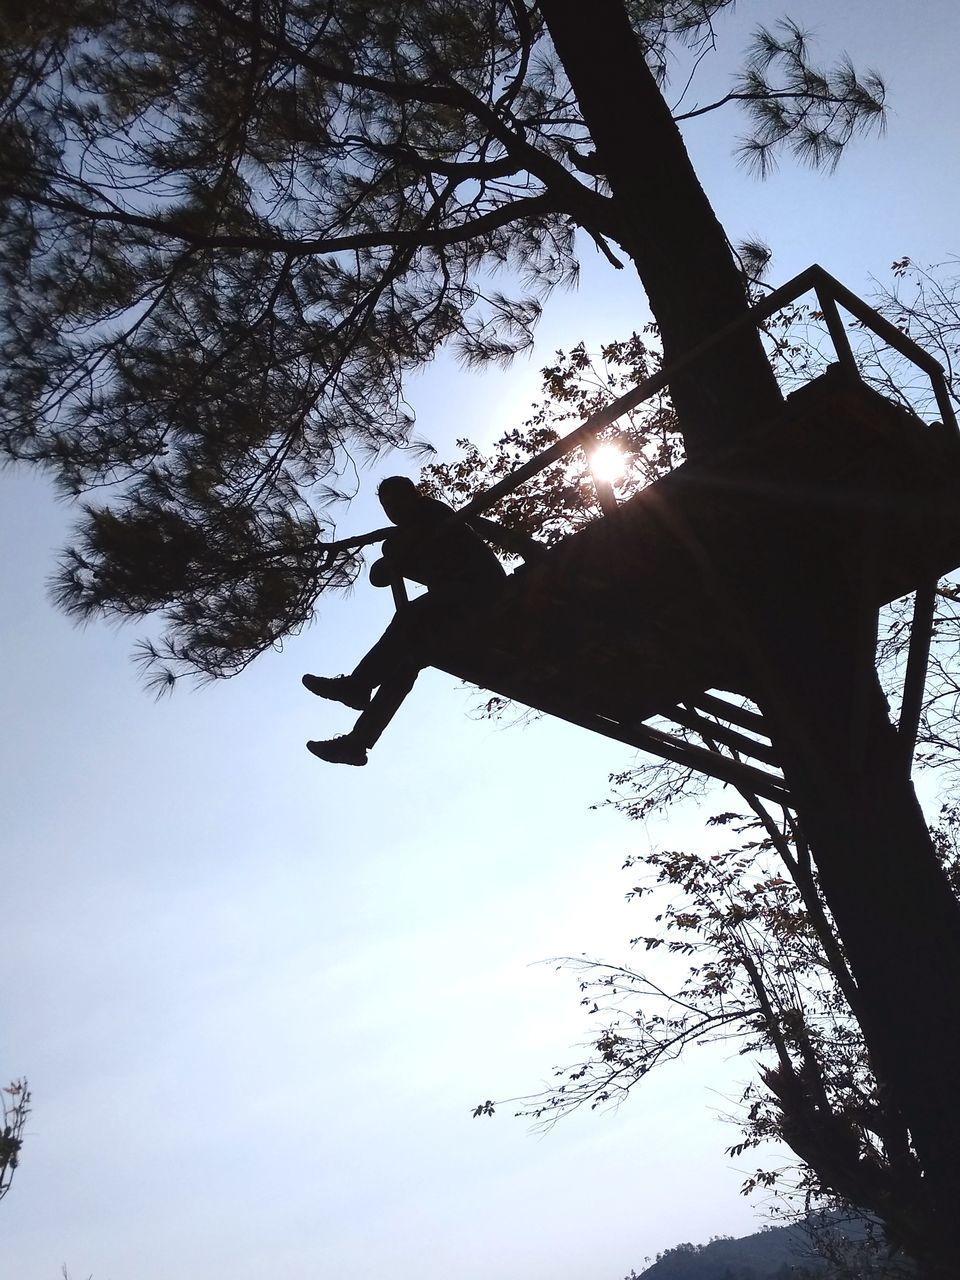 LOW ANGLE VIEW OF SILHOUETTE PERSON TREE AGAINST SKY